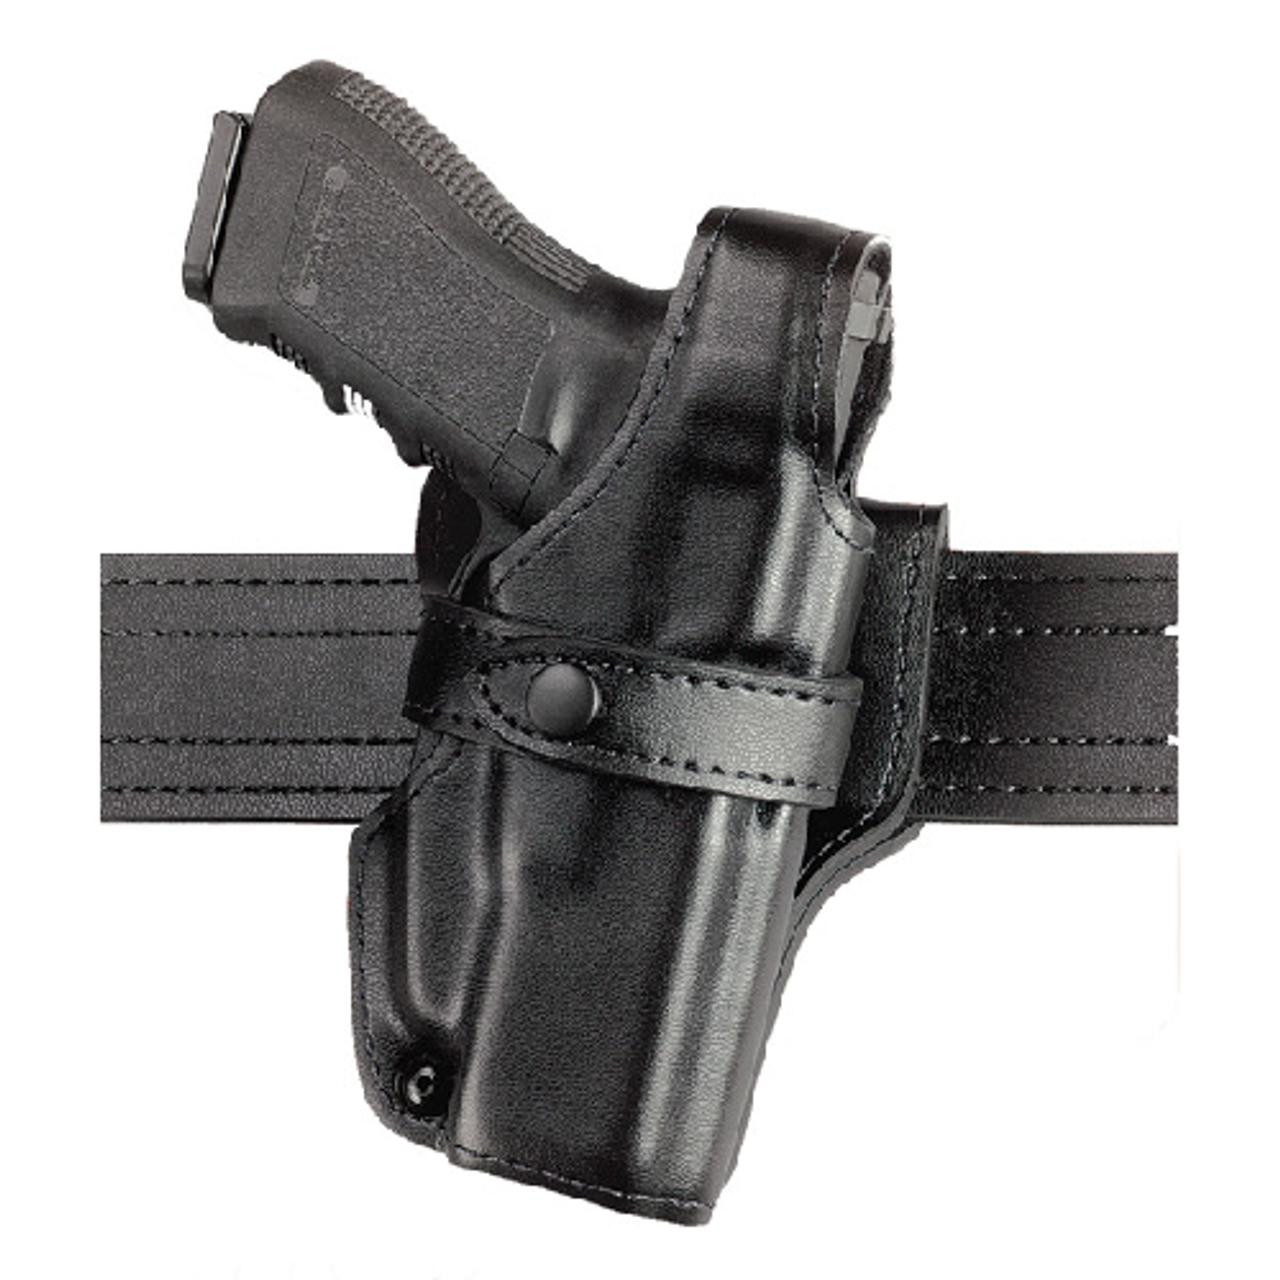 SAFARILAND 070 SSIII Mid-Ride Duty Holster - GMS TACTICAL